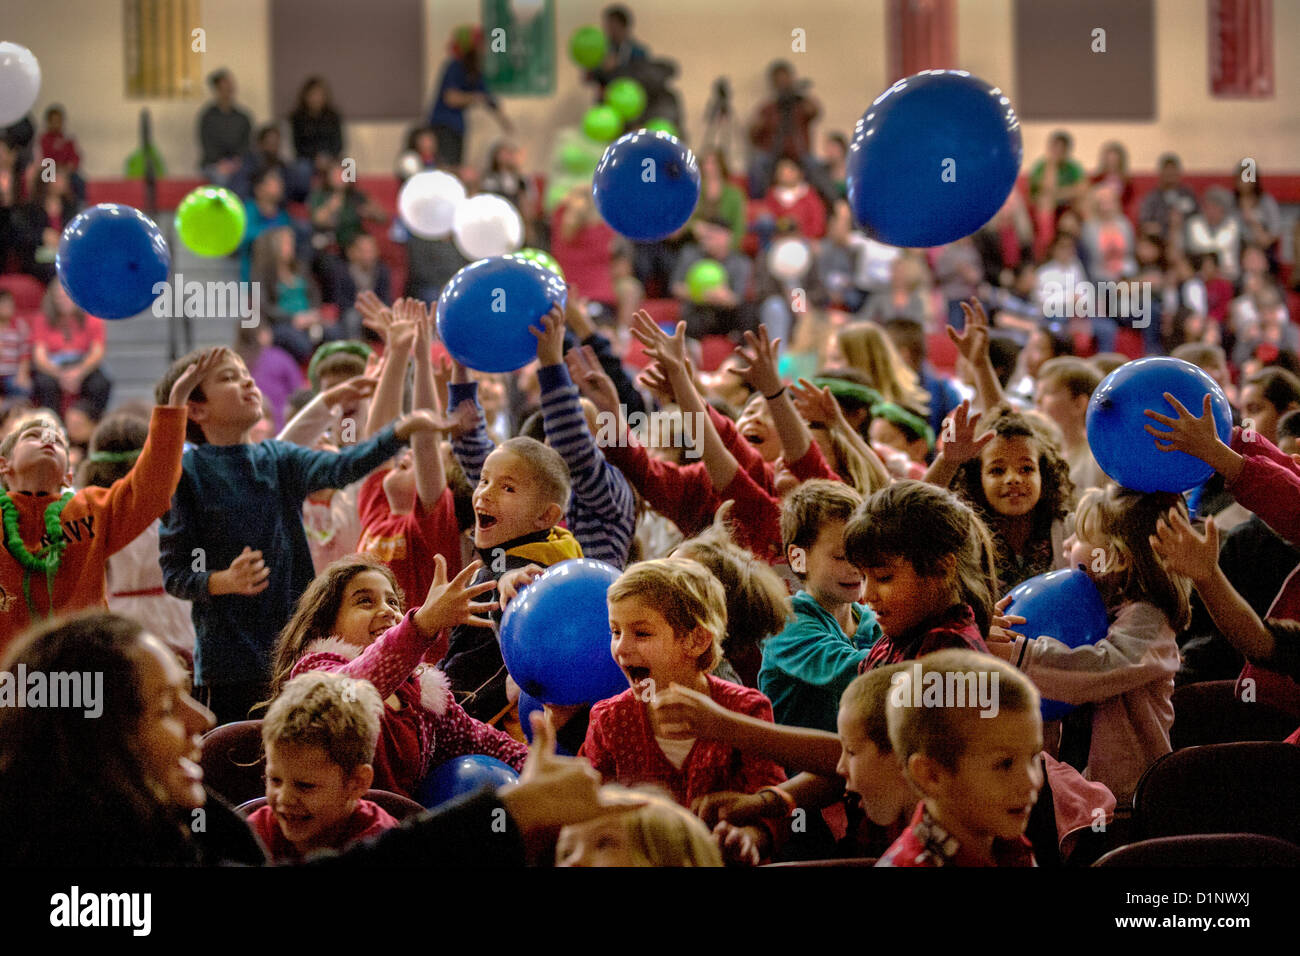 The audience at a Christmas pageant at the California School for the Deaf in Riverside, CA, happily plays with balloons. Stock Photo